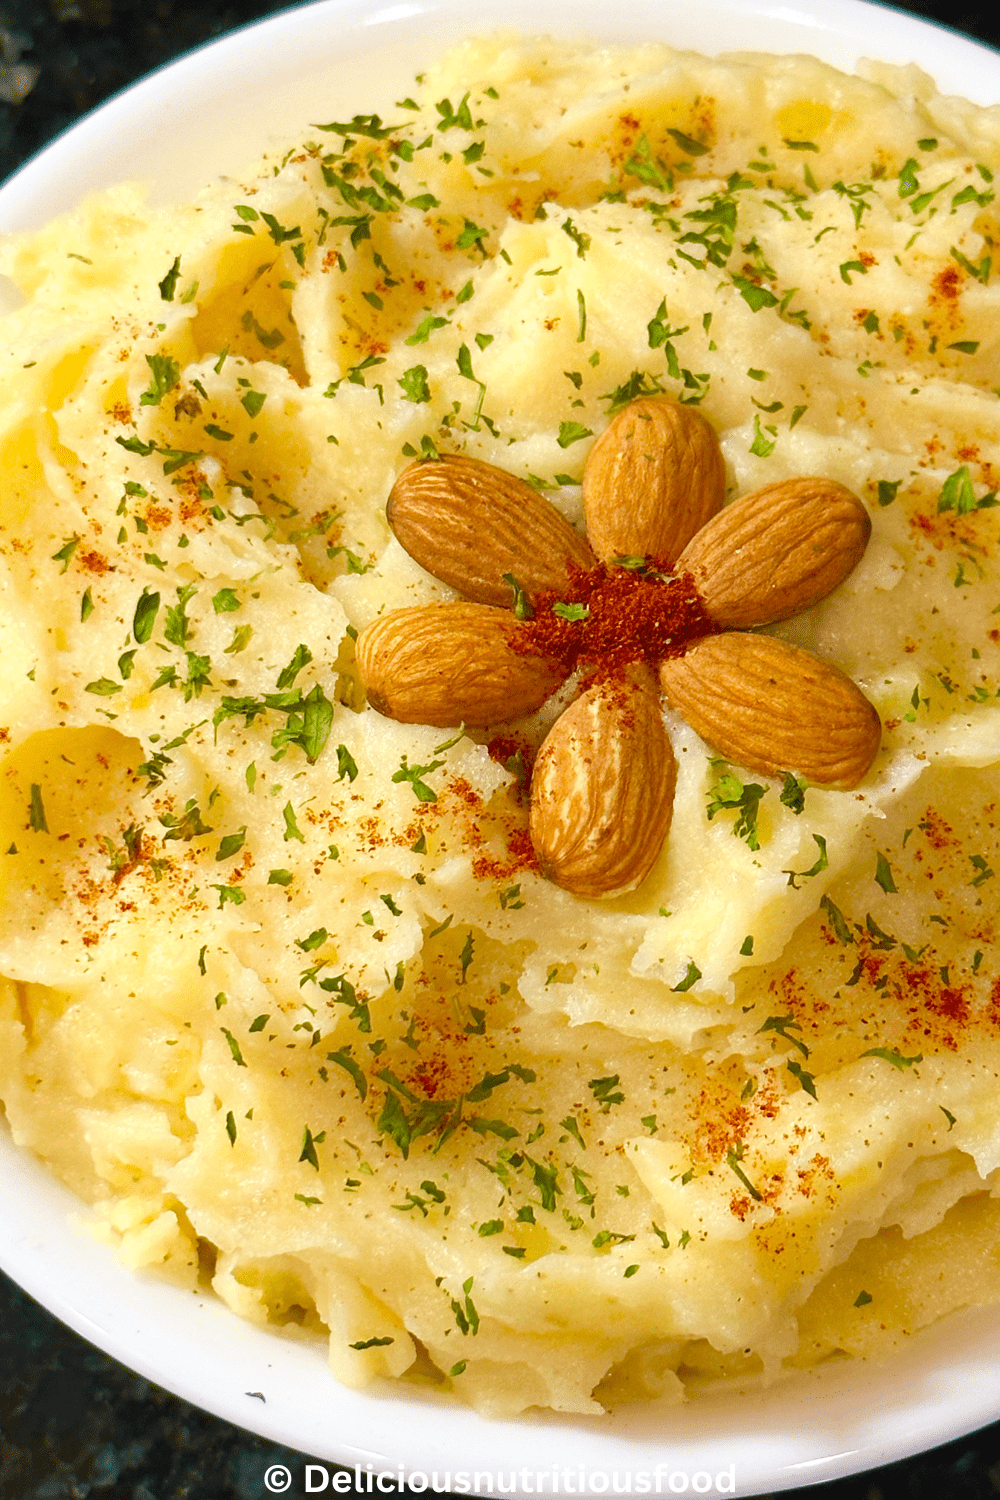 Almond milk mashed potatoes is served.